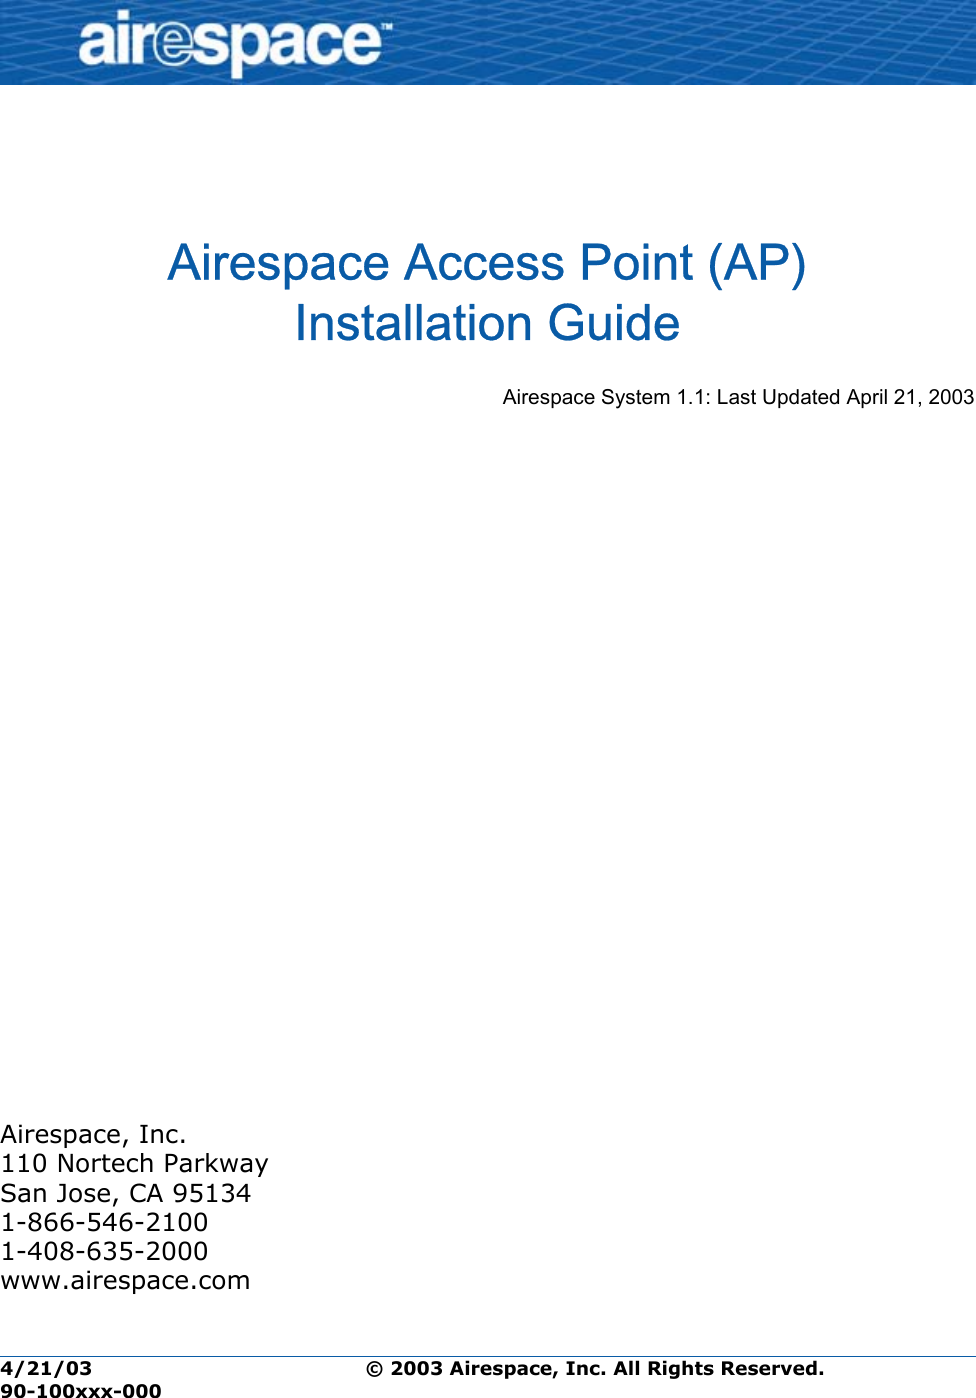 4/21/03 © 2003 Airespace, Inc. All Rights Reserved.  90-100xxx-000Airespace Access Point (AP) Installation GuideAirespace Access Point (AP)Installation GuideAirespace System 1.1: Last Updated April 21, 2003       Airespace, Inc. 110 Nortech Parkway San Jose, CA 95134 1-866-546-2100 1-408-635-2000 www.airespace.com